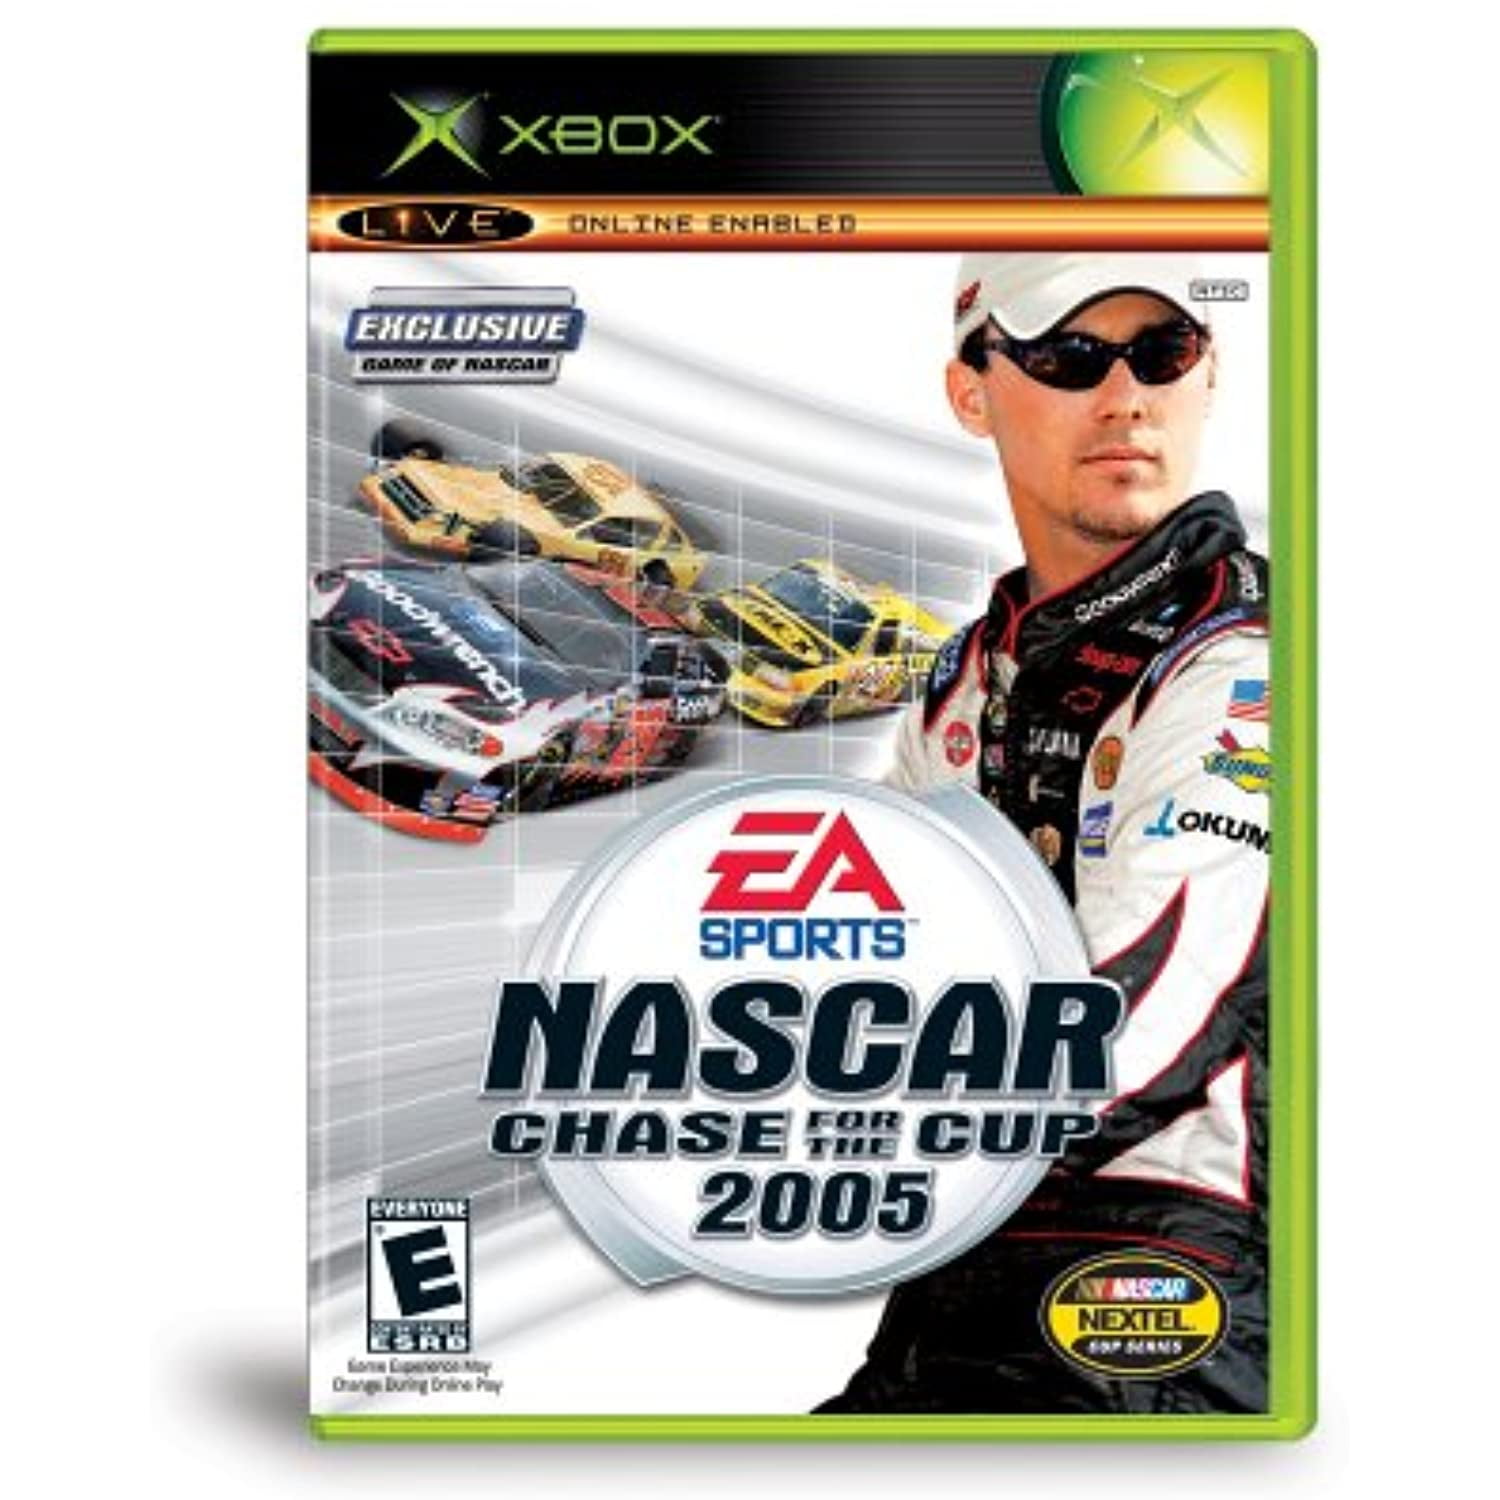 Nascar 2005 Chase For The Cup